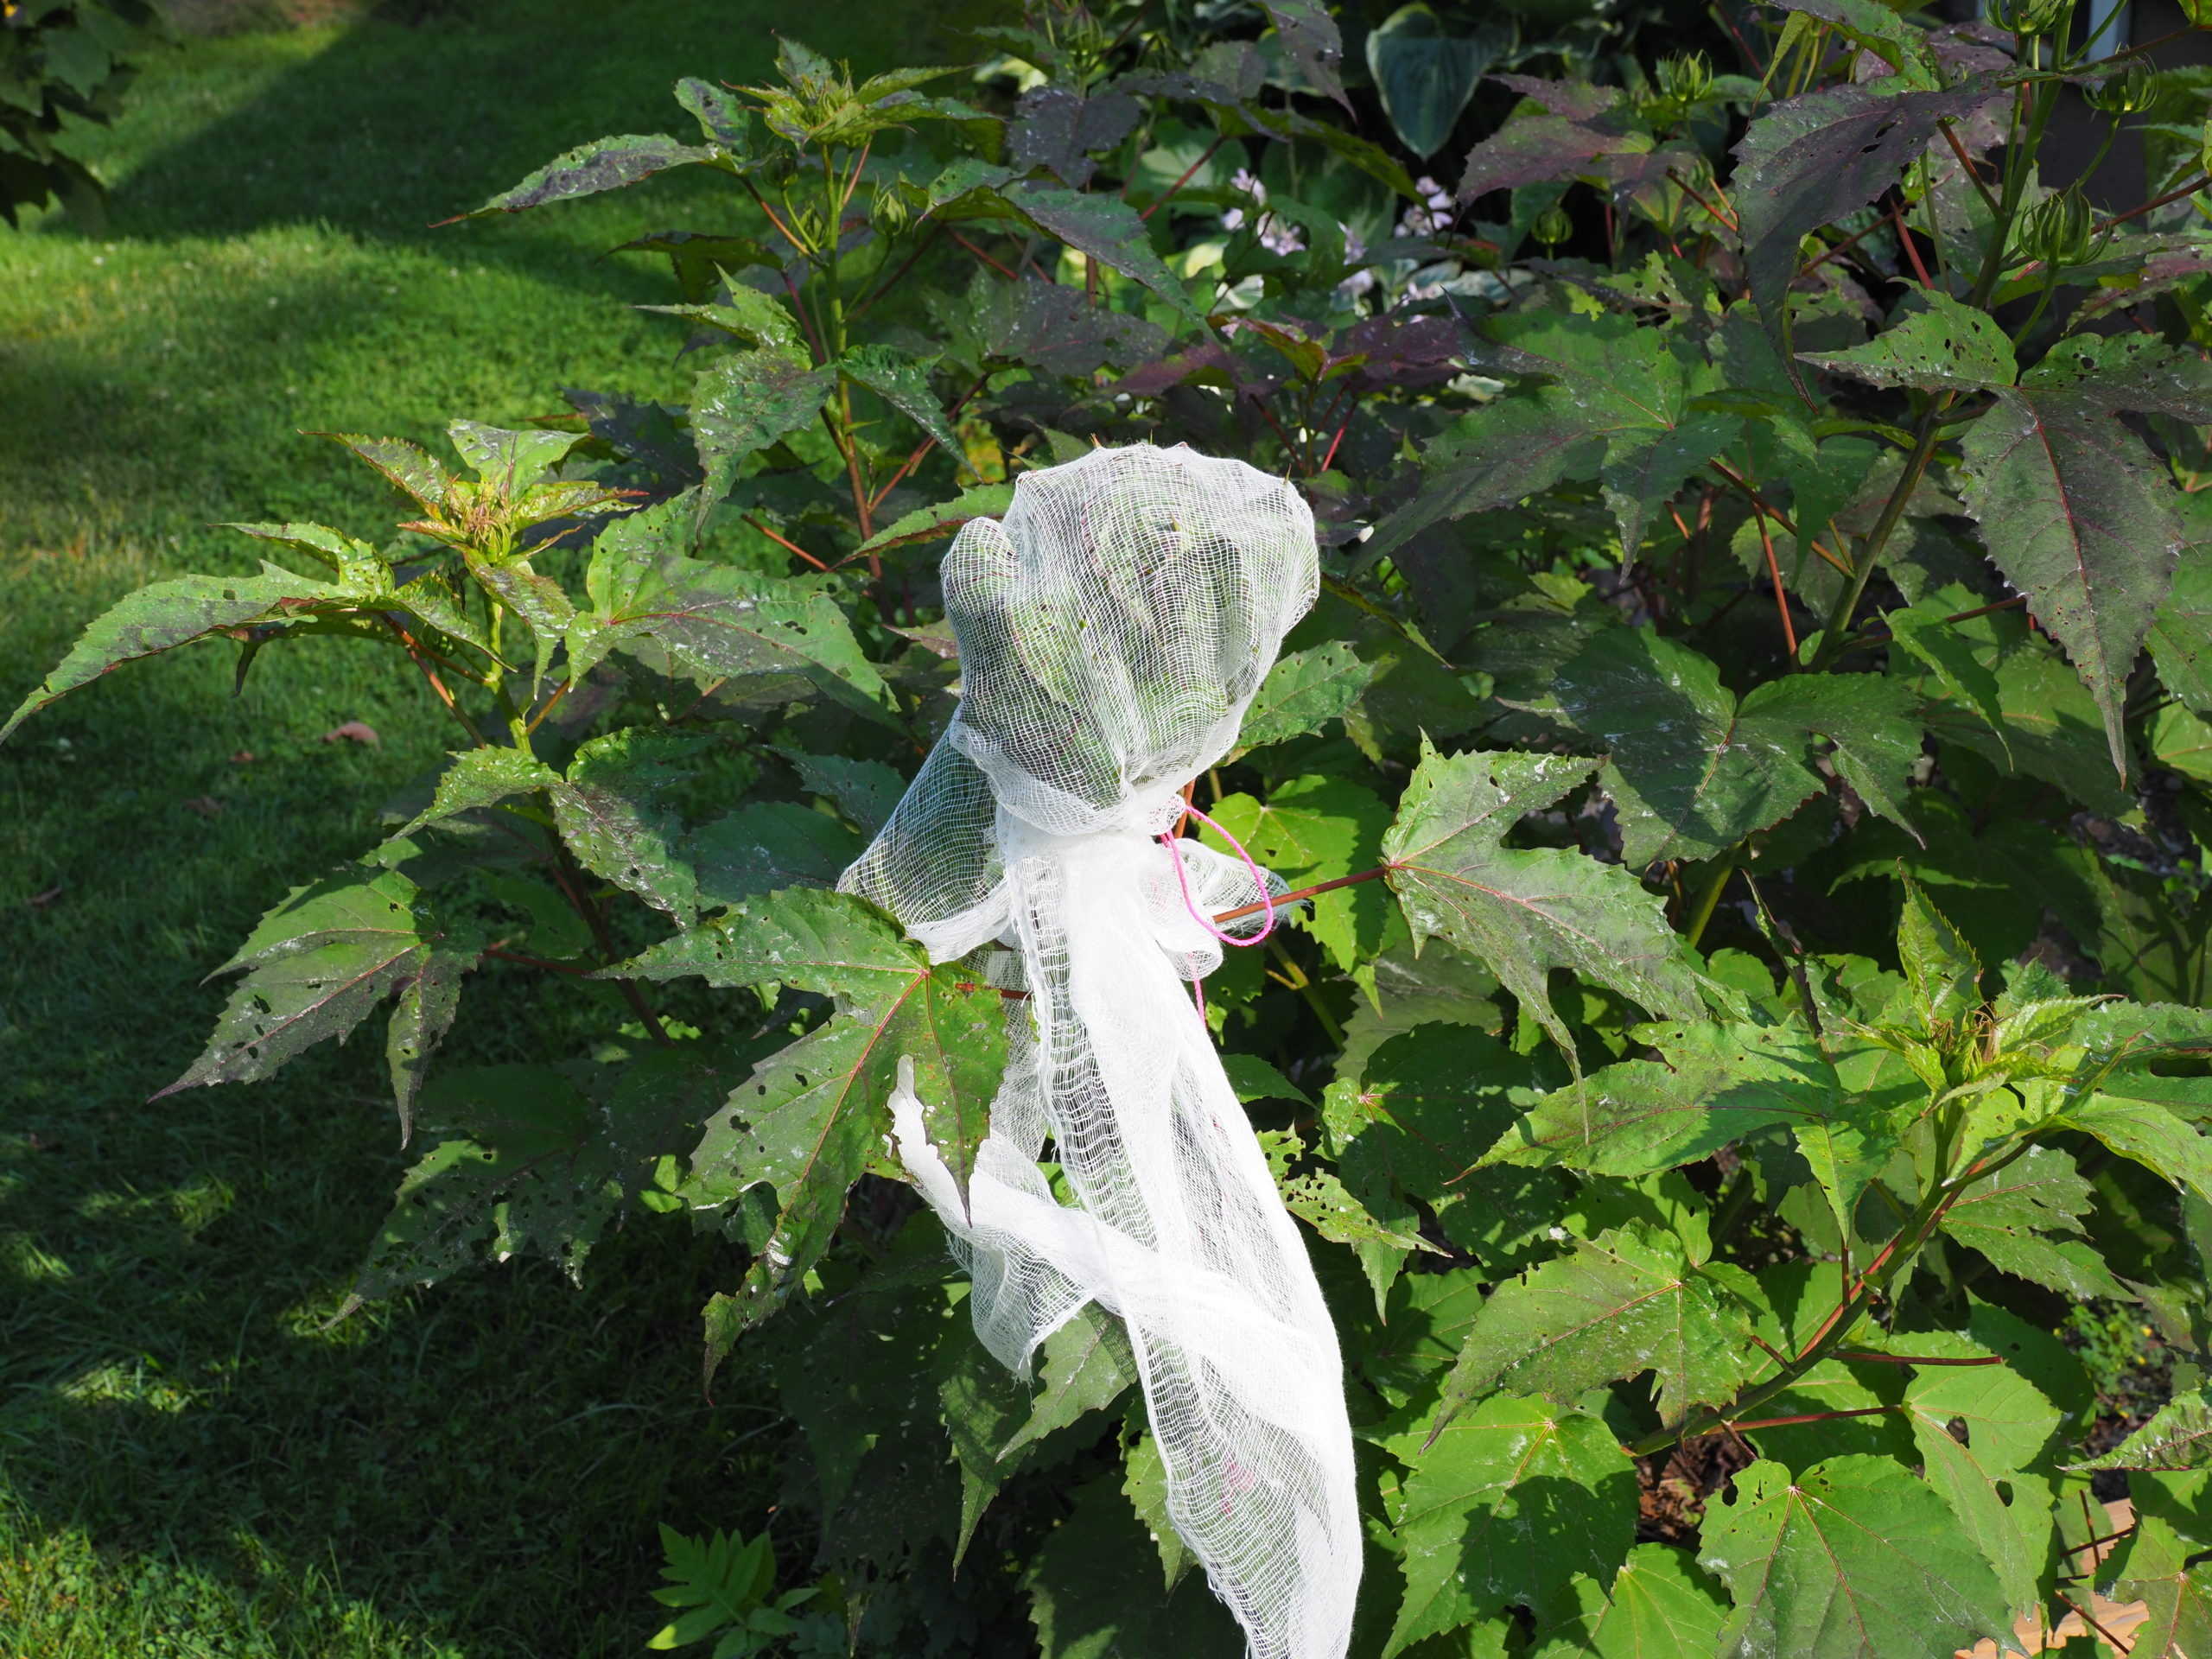 A perennial hibiscus sprayed with Btg (note white caste on foliage). The cheese cloth envelope, tied at the bottom, was an attempt to keep feeding Japanese beetles on the foliage for at least two hours to see if they died. Unfortunately, some beetles crawled out and others crawled in through the cheese cloth.